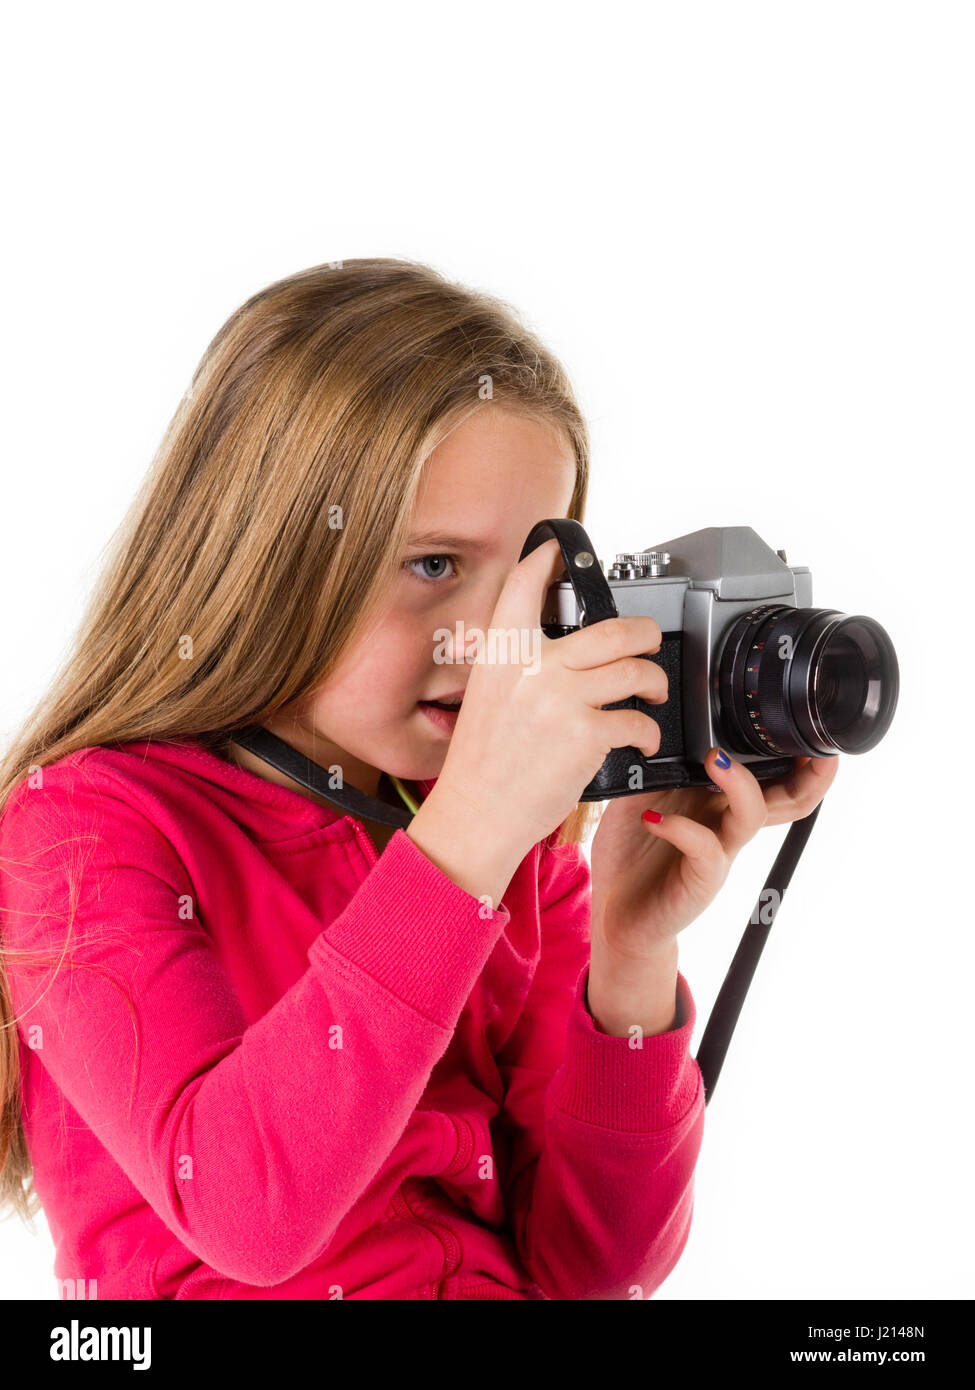 Little girl with an old camera isolated on a white background. Concepts : photography, retro, tourism, lifestyle.  Concepts : photography, retro, tour Stock Photo